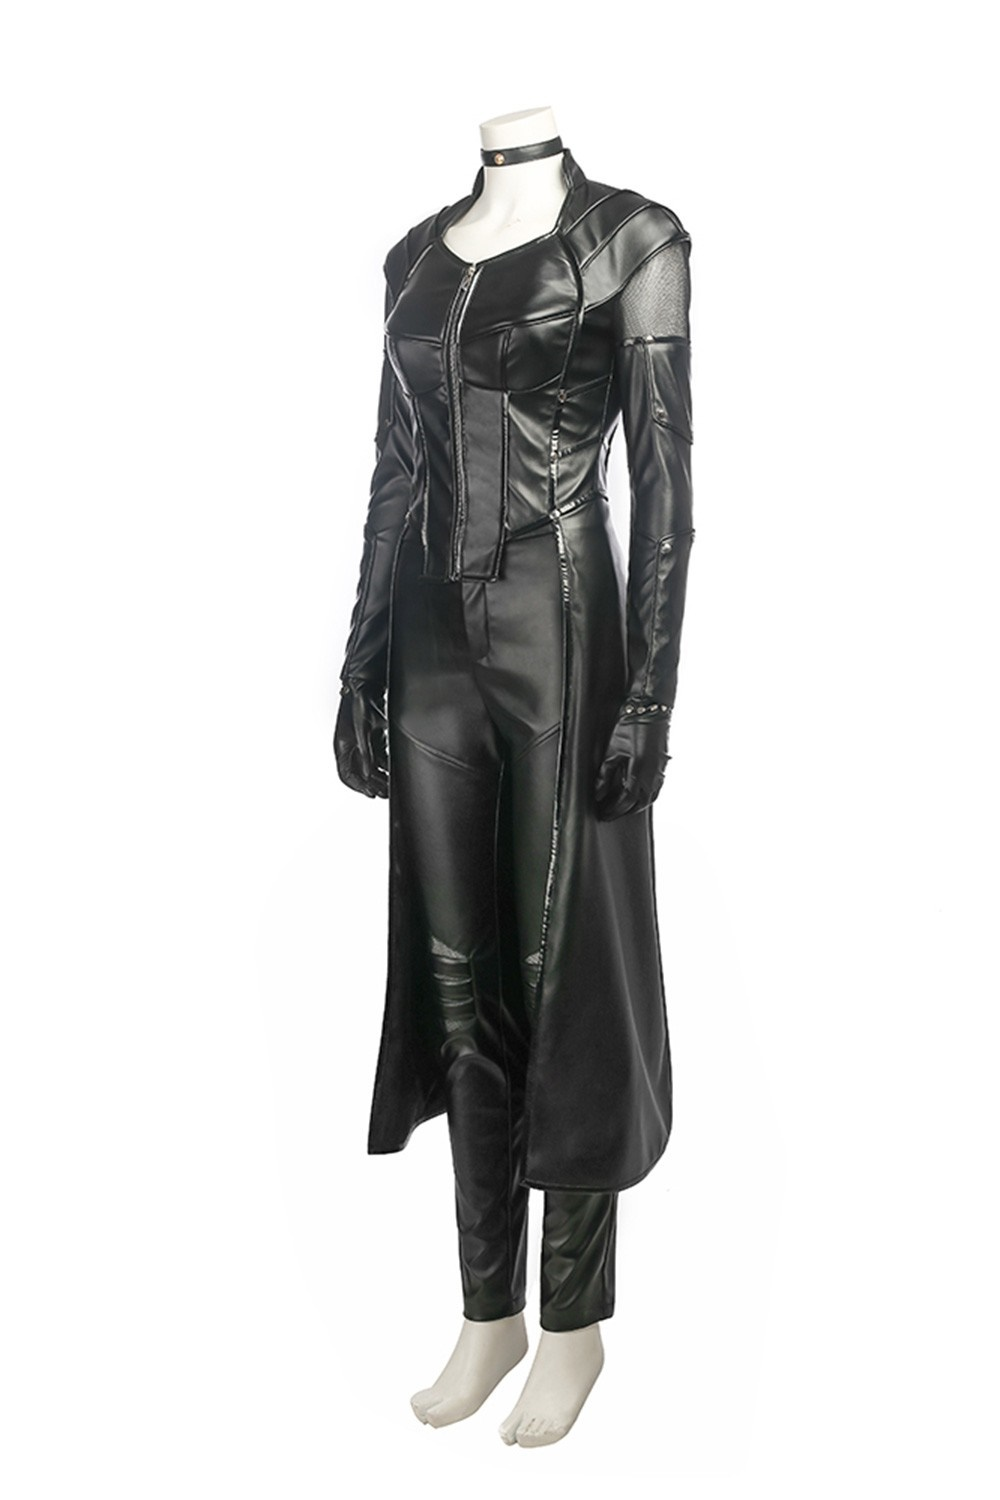 Arrow Season 5 Black Canary Laurel Lance Outfit Cosplay Costume